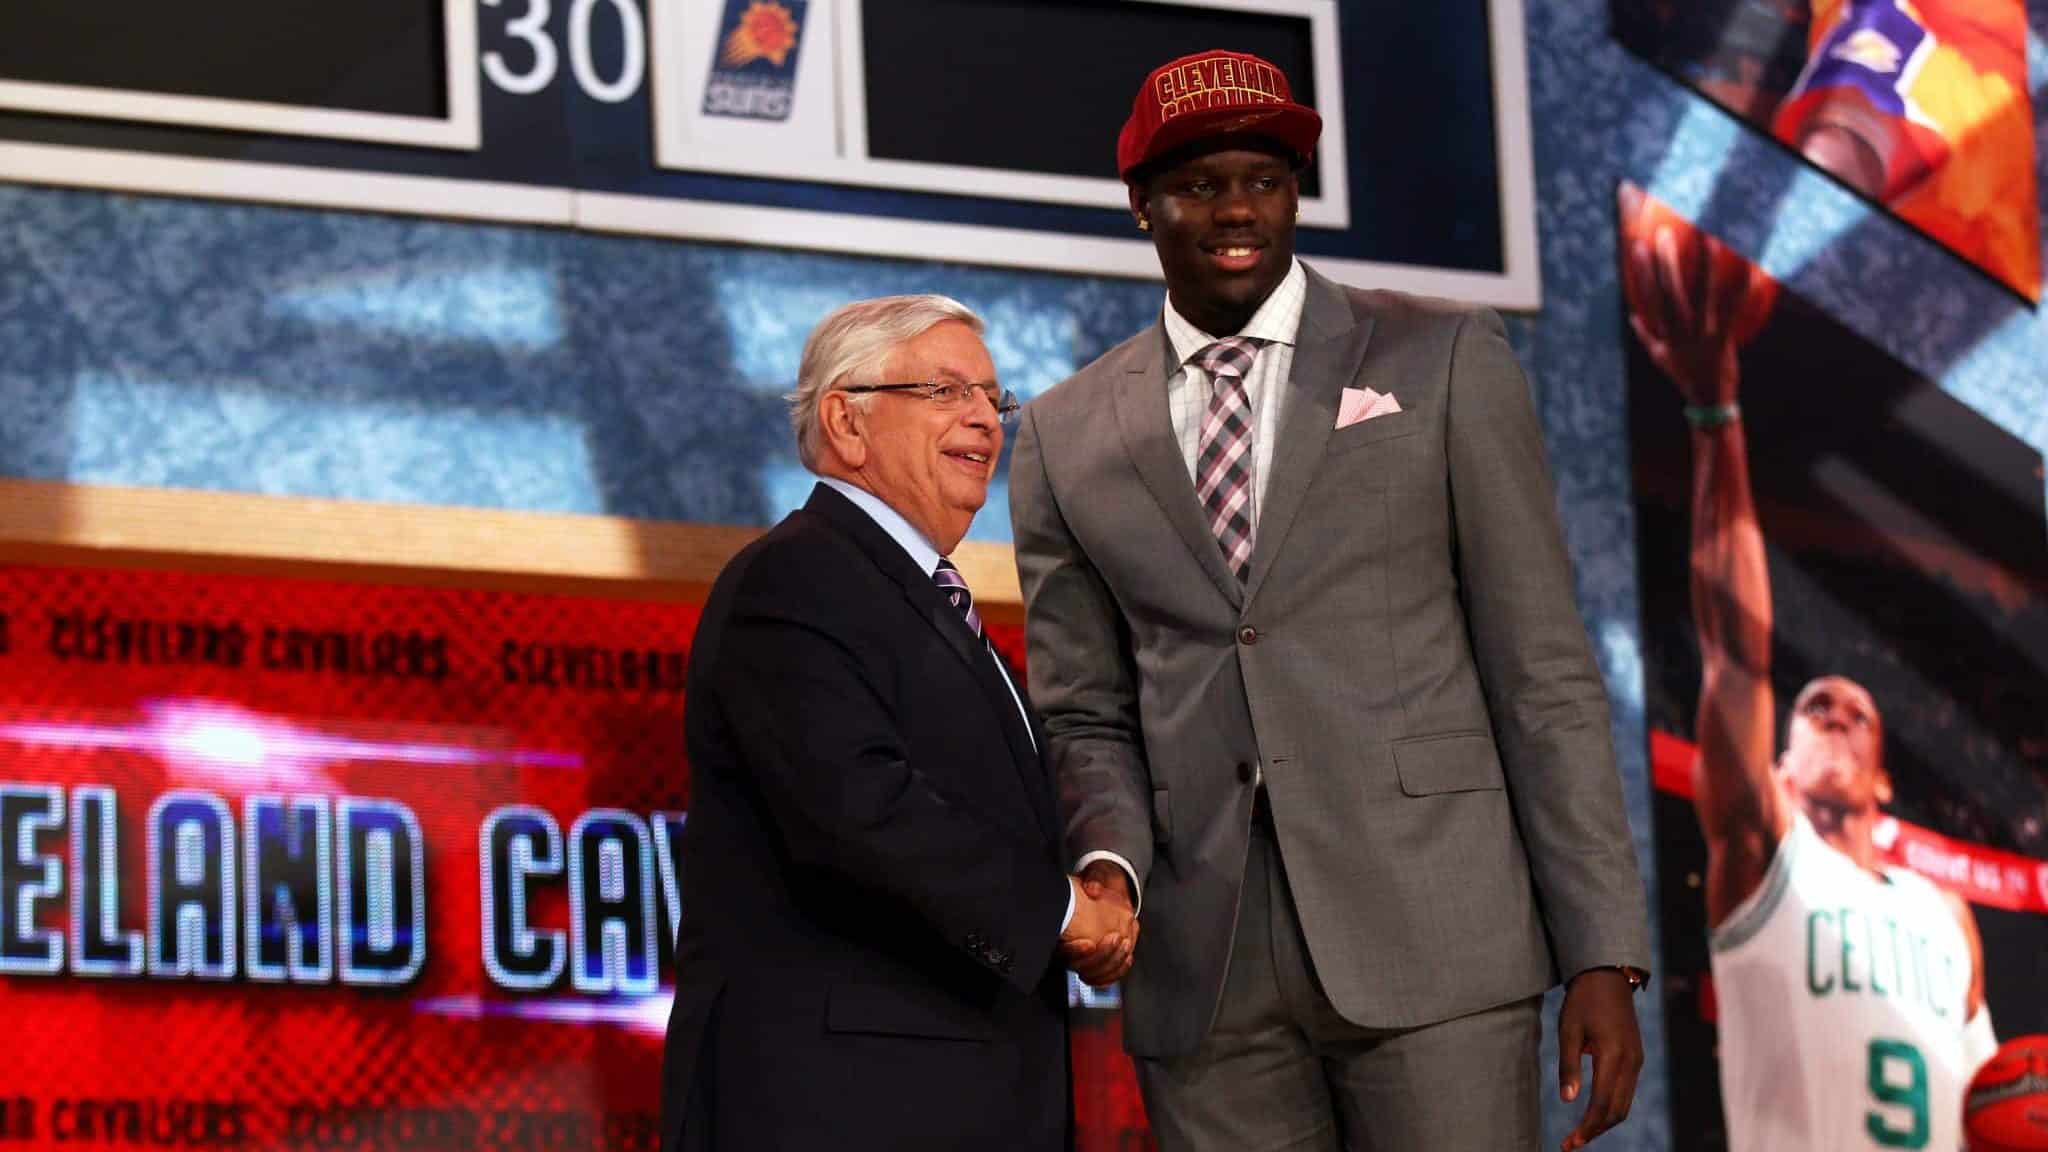 NEW YORK, NY - JUNE 27: Anthony Bennett of UNLV poses for a photo with NBA Commissioner David Stern after Bennett was drafted #1 overall in the first round by the Cleveland Cavaliers during the 2013 NBA Draft at Barclays Center on June 27, 2013 in in the Brooklyn Bourough of New York City. NOTE TO USER: User expressly acknowledges and agrees that, by downloading and/or using this Photograph, user is consenting to the terms and conditions of the Getty Images License Agreement.